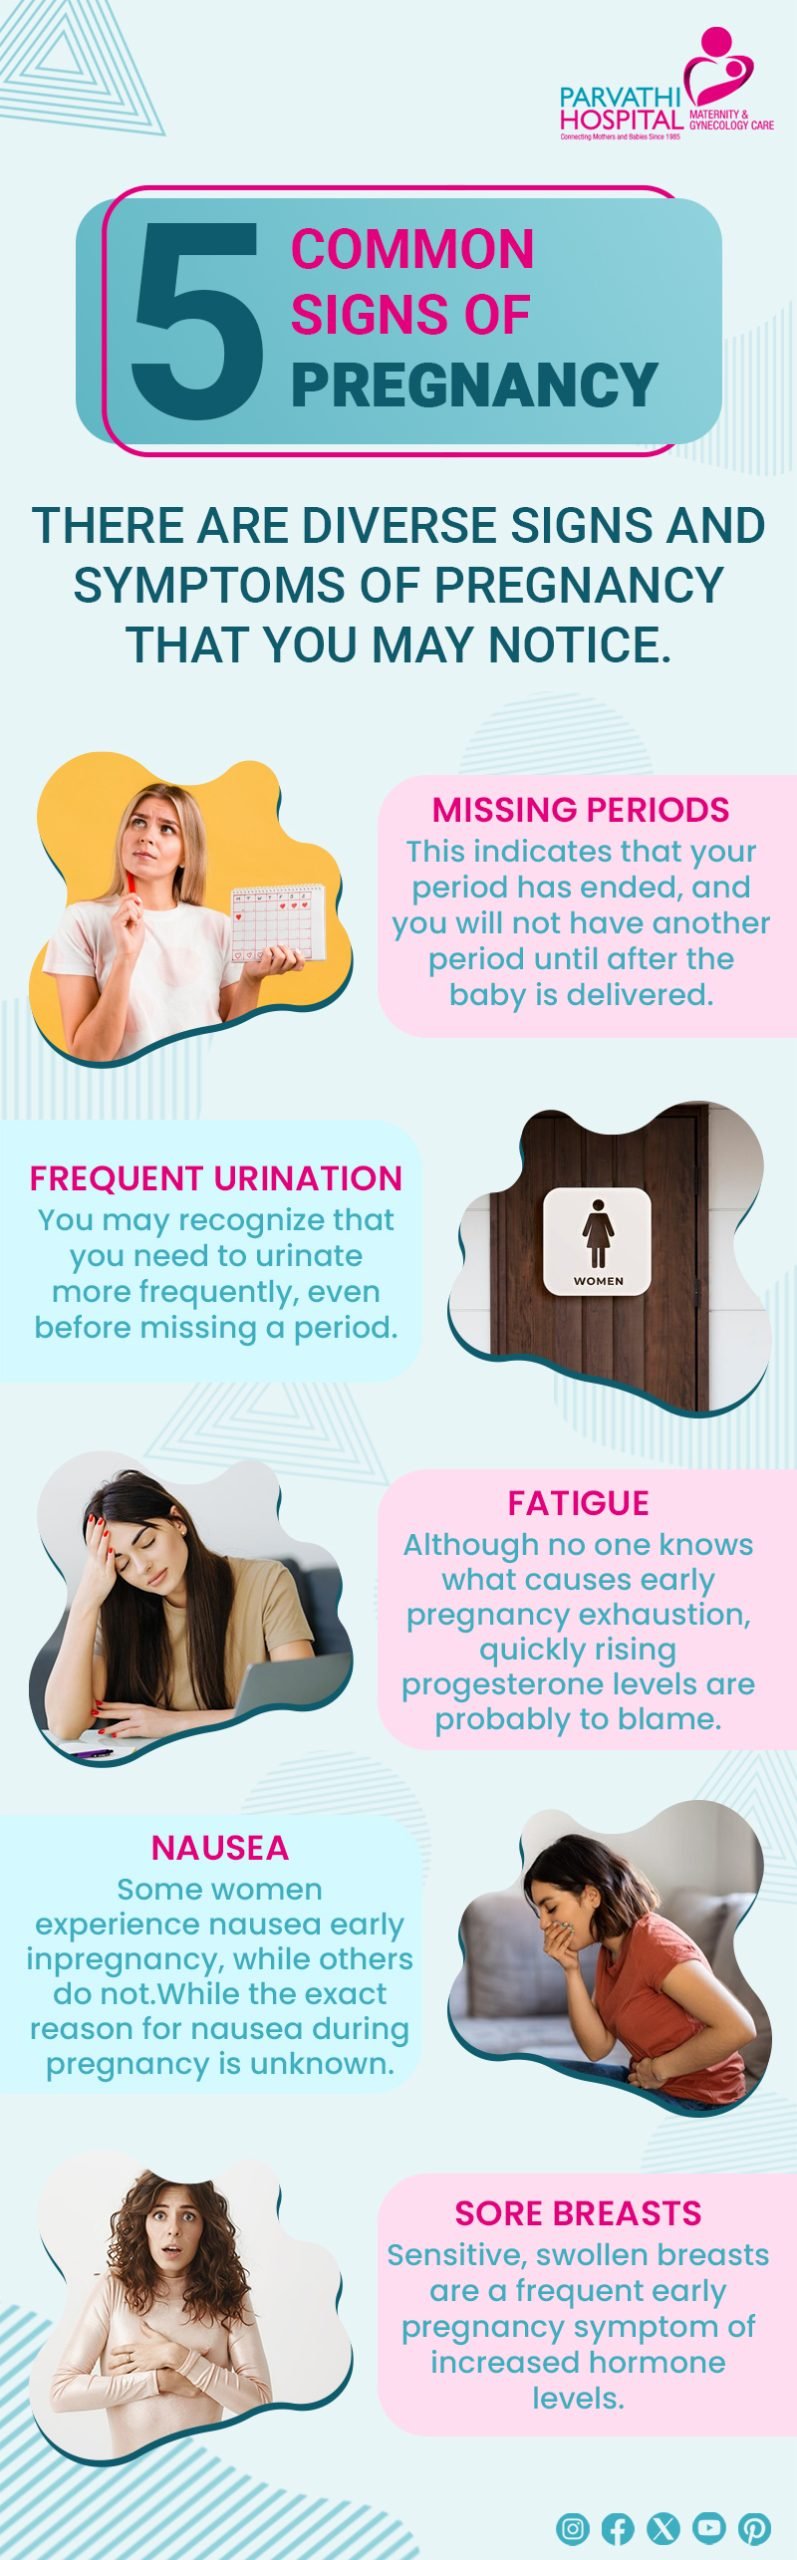 Common Signs of Pregnancy